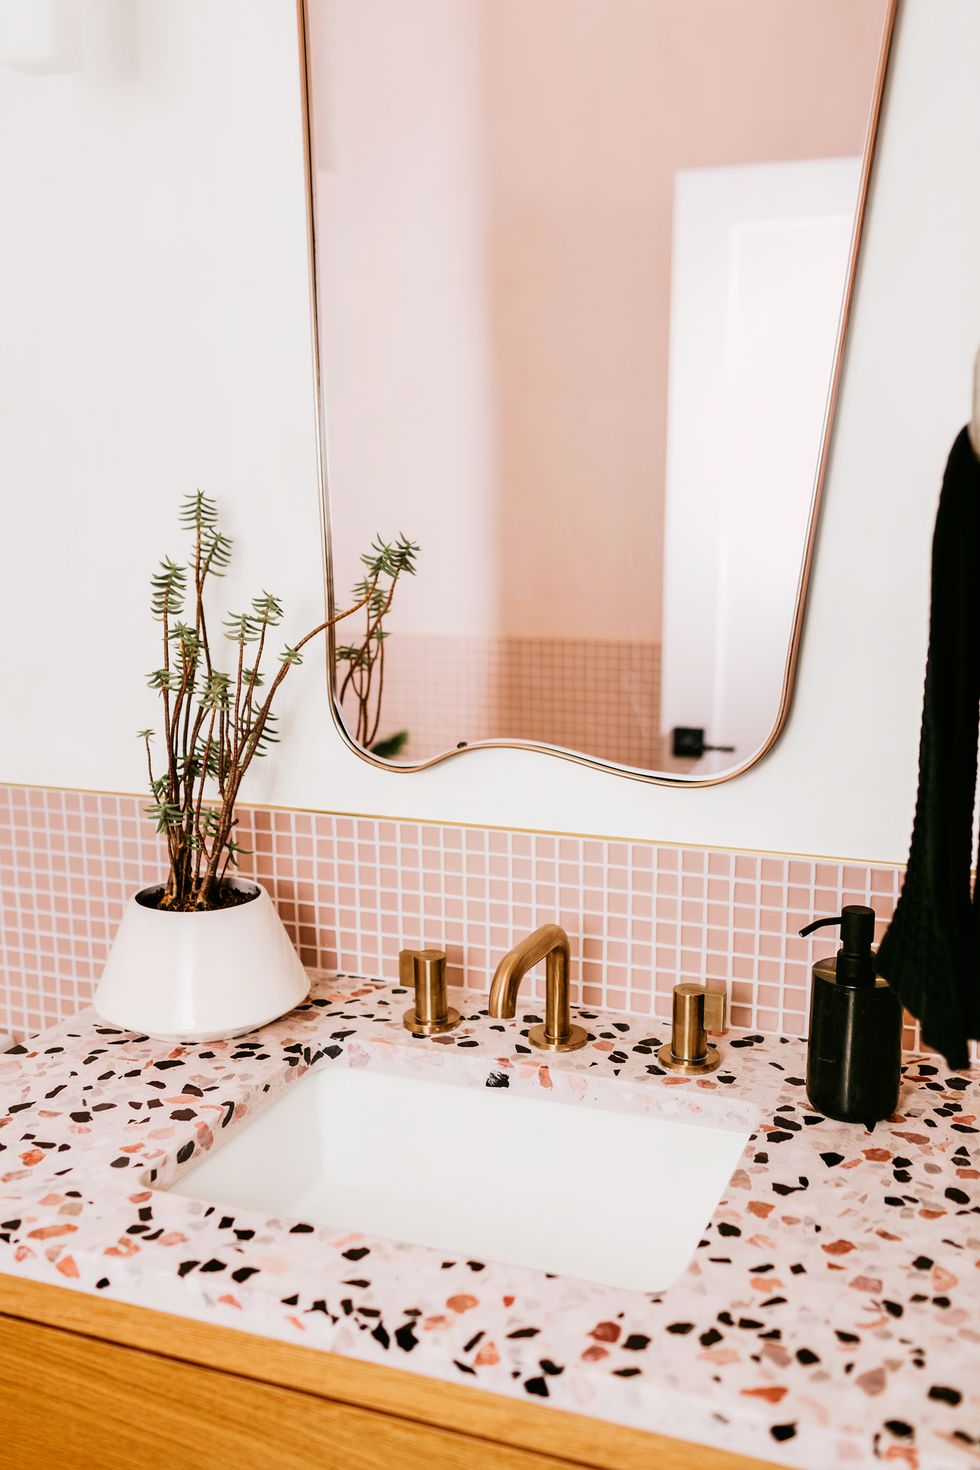 Bathroom Decorating Essentials You Need Now